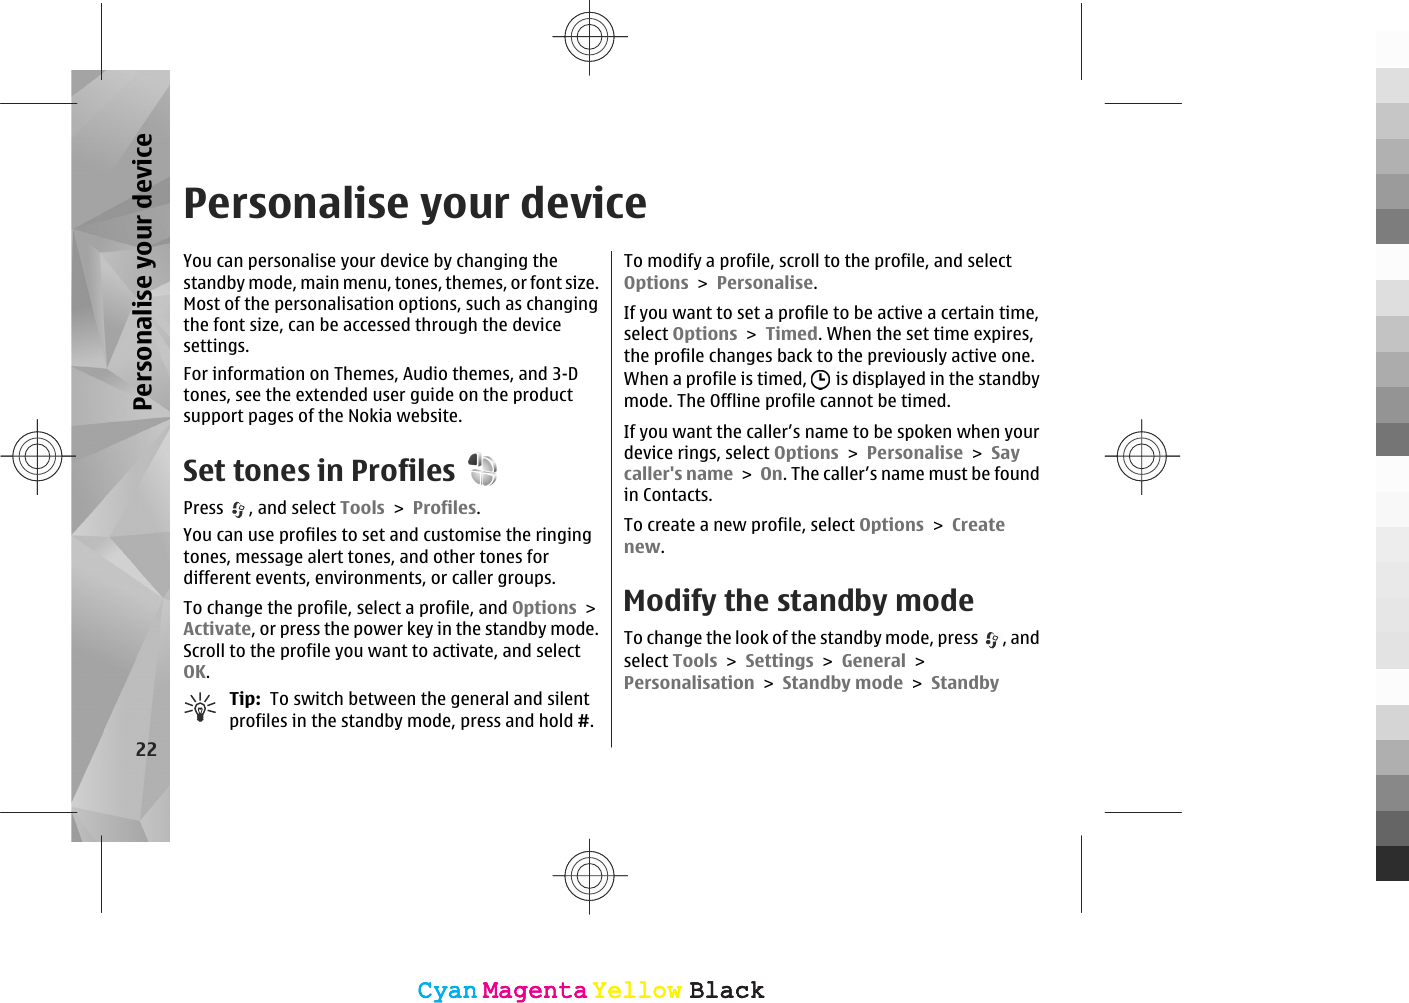 Personalise your deviceYou can personalise your device by changing thestandby mode, main menu, tones, themes, or font size.Most of the personalisation options, such as changingthe font size, can be accessed through the devicesettings.For information on Themes, Audio themes, and 3-Dtones, see the extended user guide on the productsupport pages of the Nokia website.Set tones in ProfilesPress  , and select Tools &gt; Profiles.You can use profiles to set and customise the ringingtones, message alert tones, and other tones fordifferent events, environments, or caller groups.To change the profile, select a profile, and Options &gt;Activate, or press the power key in the standby mode.Scroll to the profile you want to activate, and selectOK.Tip:  To switch between the general and silentprofiles in the standby mode, press and hold #.To modify a profile, scroll to the profile, and selectOptions &gt; Personalise.If you want to set a profile to be active a certain time,select Options &gt; Timed. When the set time expires,the profile changes back to the previously active one.When a profile is timed,   is displayed in the standbymode. The Offline profile cannot be timed.If you want the caller’s name to be spoken when yourdevice rings, select Options &gt; Personalise &gt; Saycaller&apos;s name &gt; On. The caller’s name must be foundin Contacts.To create a new profile, select Options &gt; Createnew.Modify the standby modeTo change the look of the standby mode, press  , andselect Tools &gt; Settings &gt; General &gt;Personalisation &gt; Standby mode &gt; Standby22Personalise your deviceCyanCyanMagentaMagentaYellowYellowBlackBlackCyanCyanMagentaMagentaYellowYellowBlackBlack